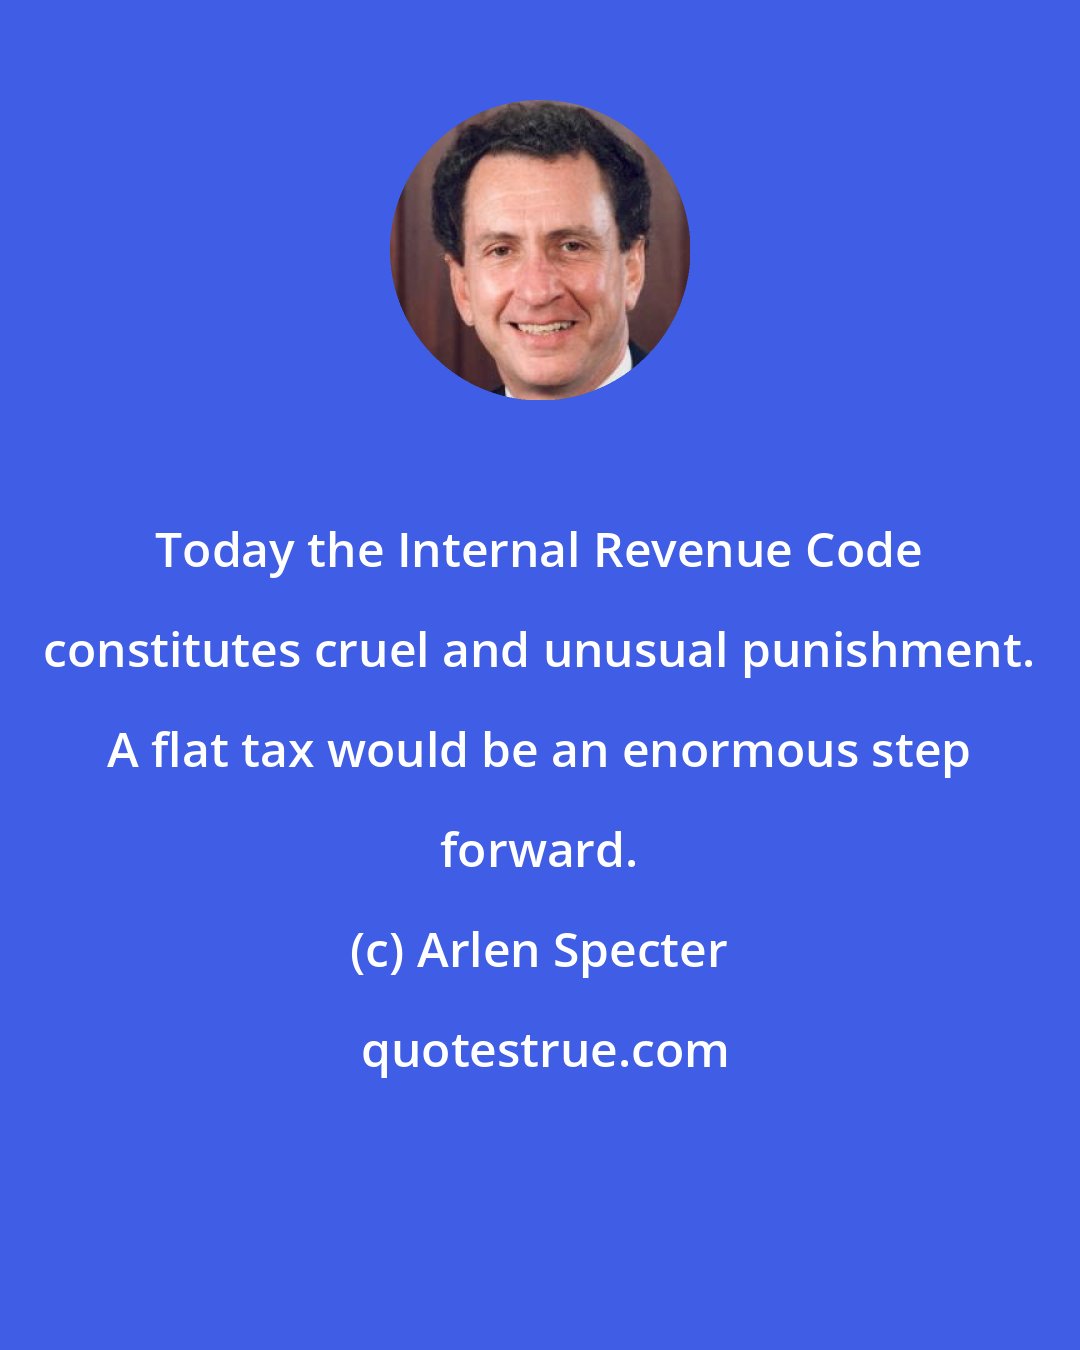 Arlen Specter: Today the Internal Revenue Code constitutes cruel and unusual punishment. A flat tax would be an enormous step forward.